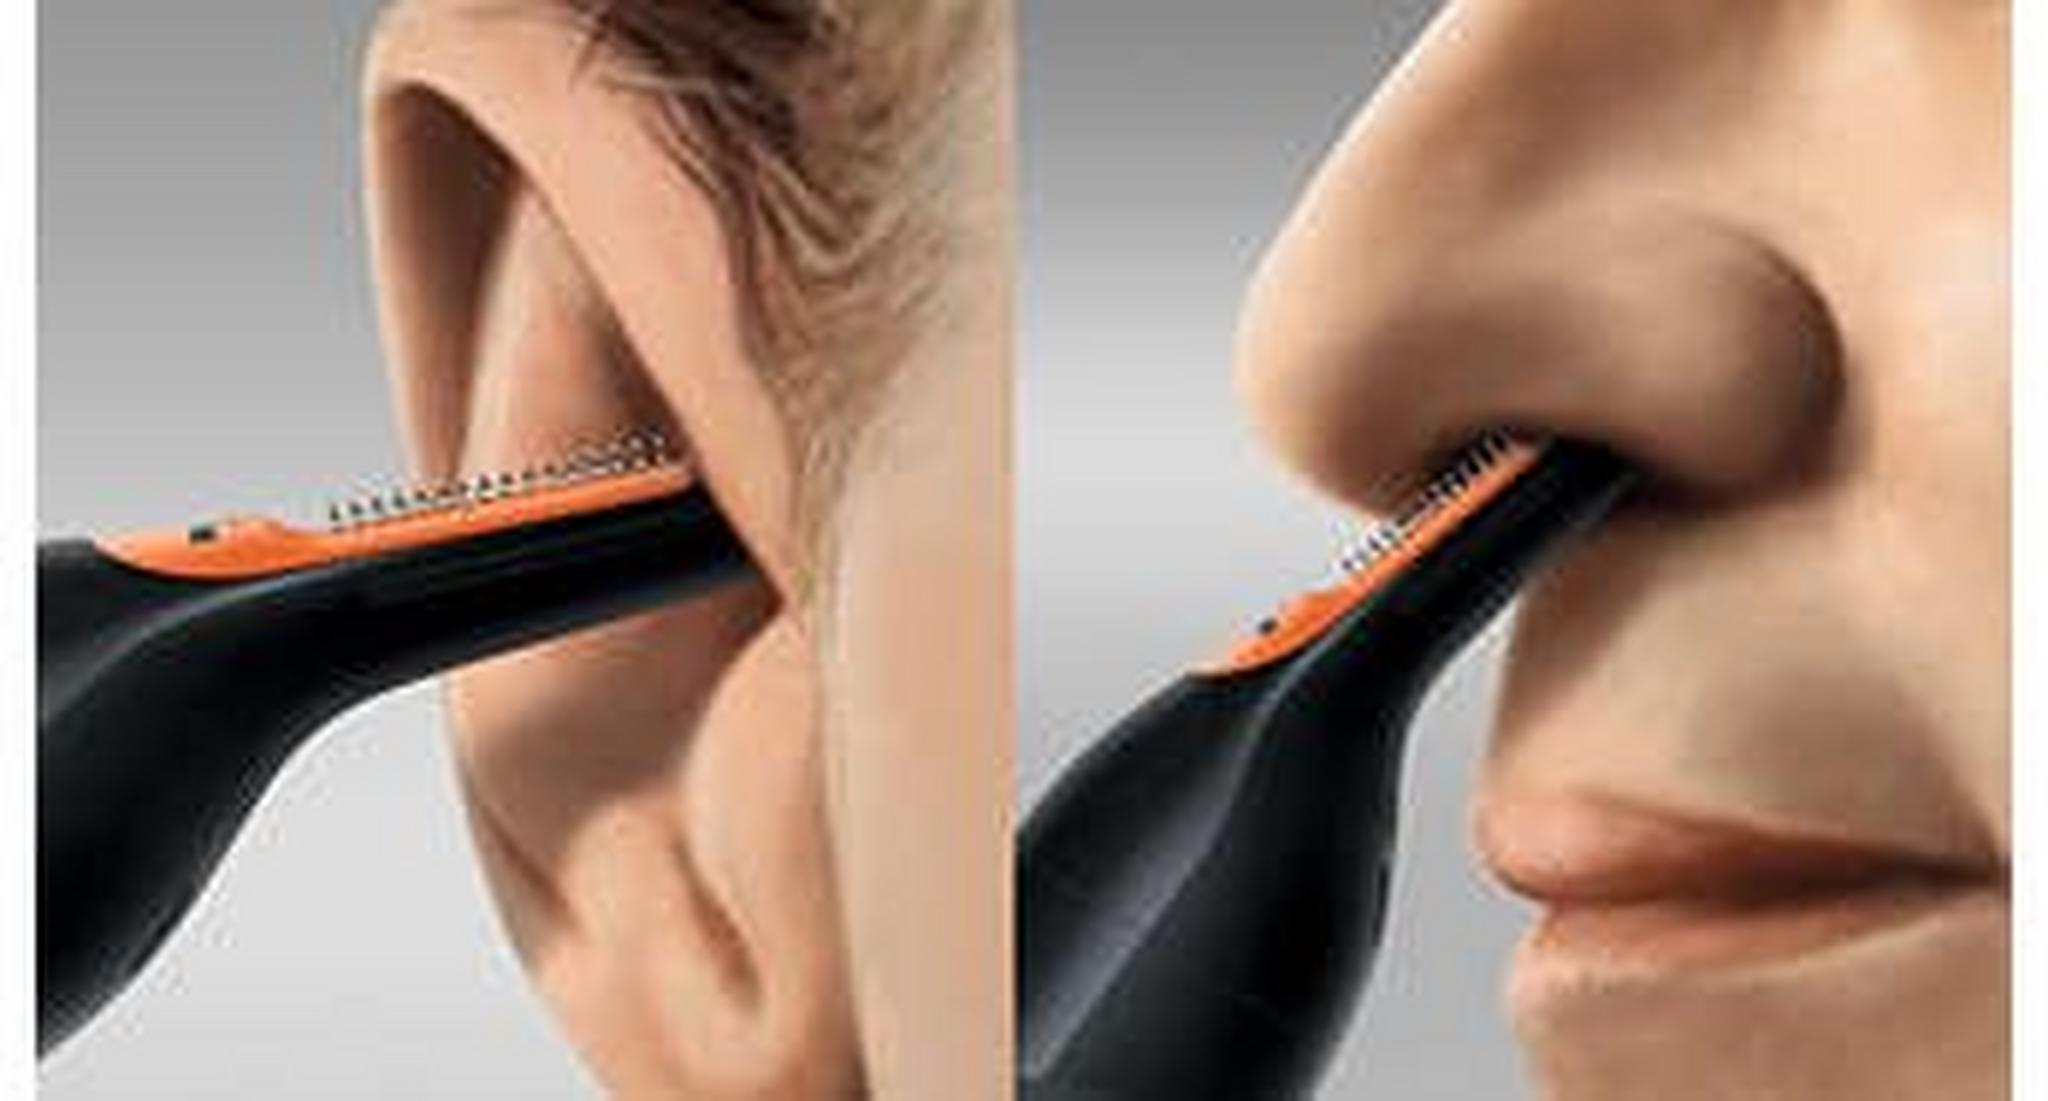 Philips Nose & Ear Trimmer - NT1150/10